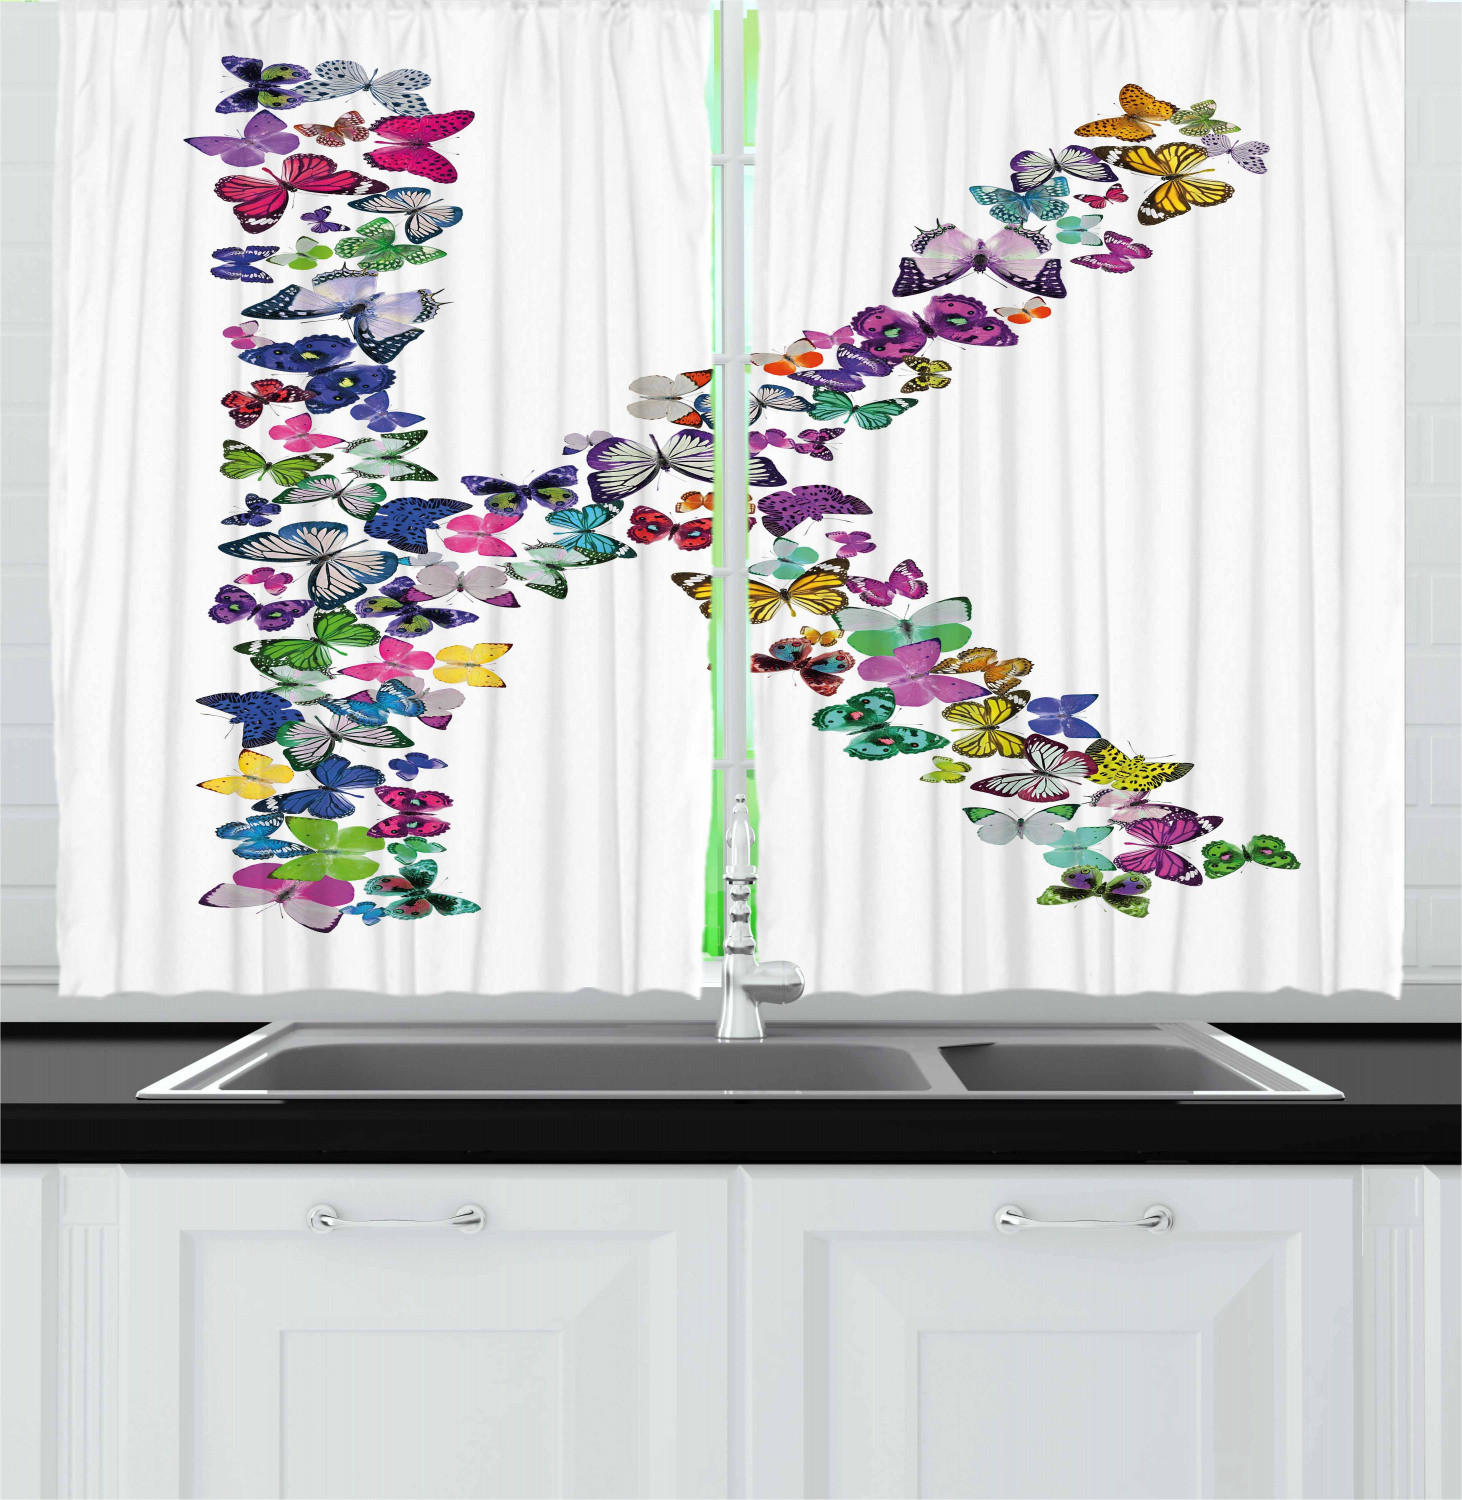 Butterfly Kitchen Curtains
 Butterfly Letters Kitchen Curtains 2 Panel Set Window